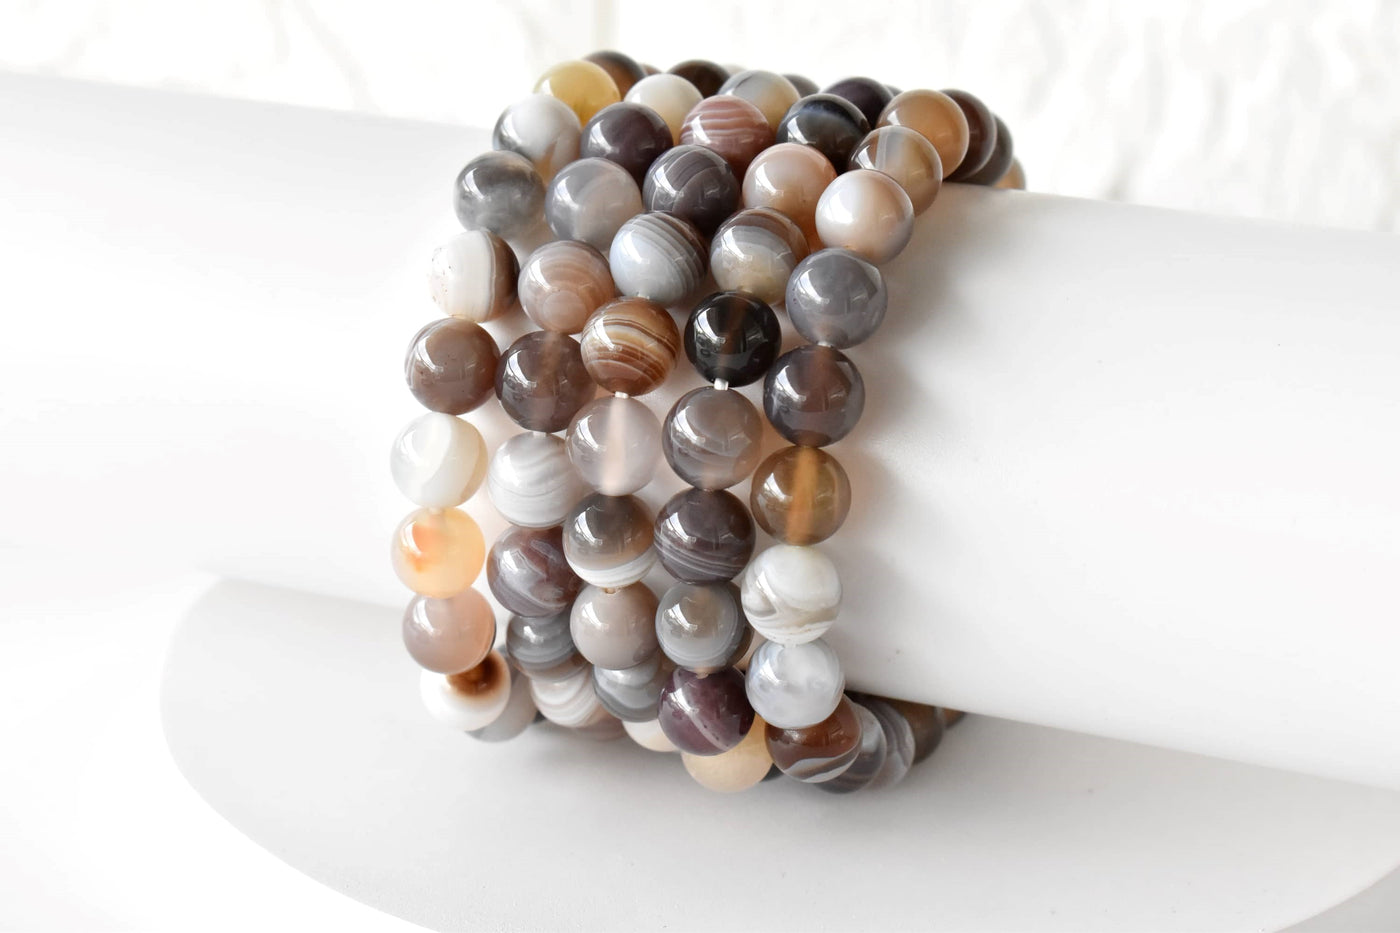 Botswana Agate Bracelet (Alignment With The Higher Self and Inspiration)